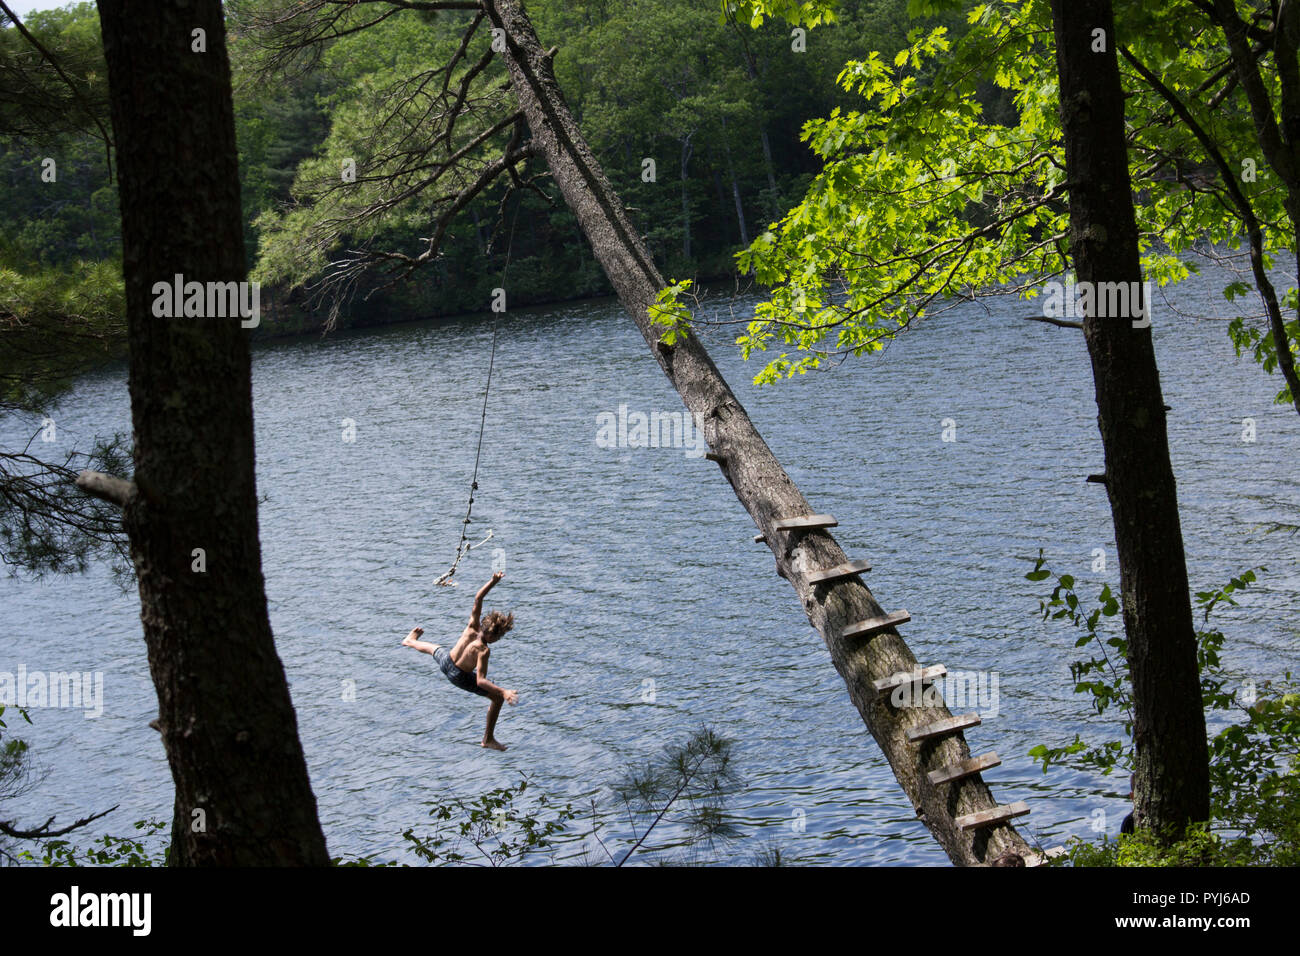 Swinging on a rope swing, on a hot summer's day. Stock Photo